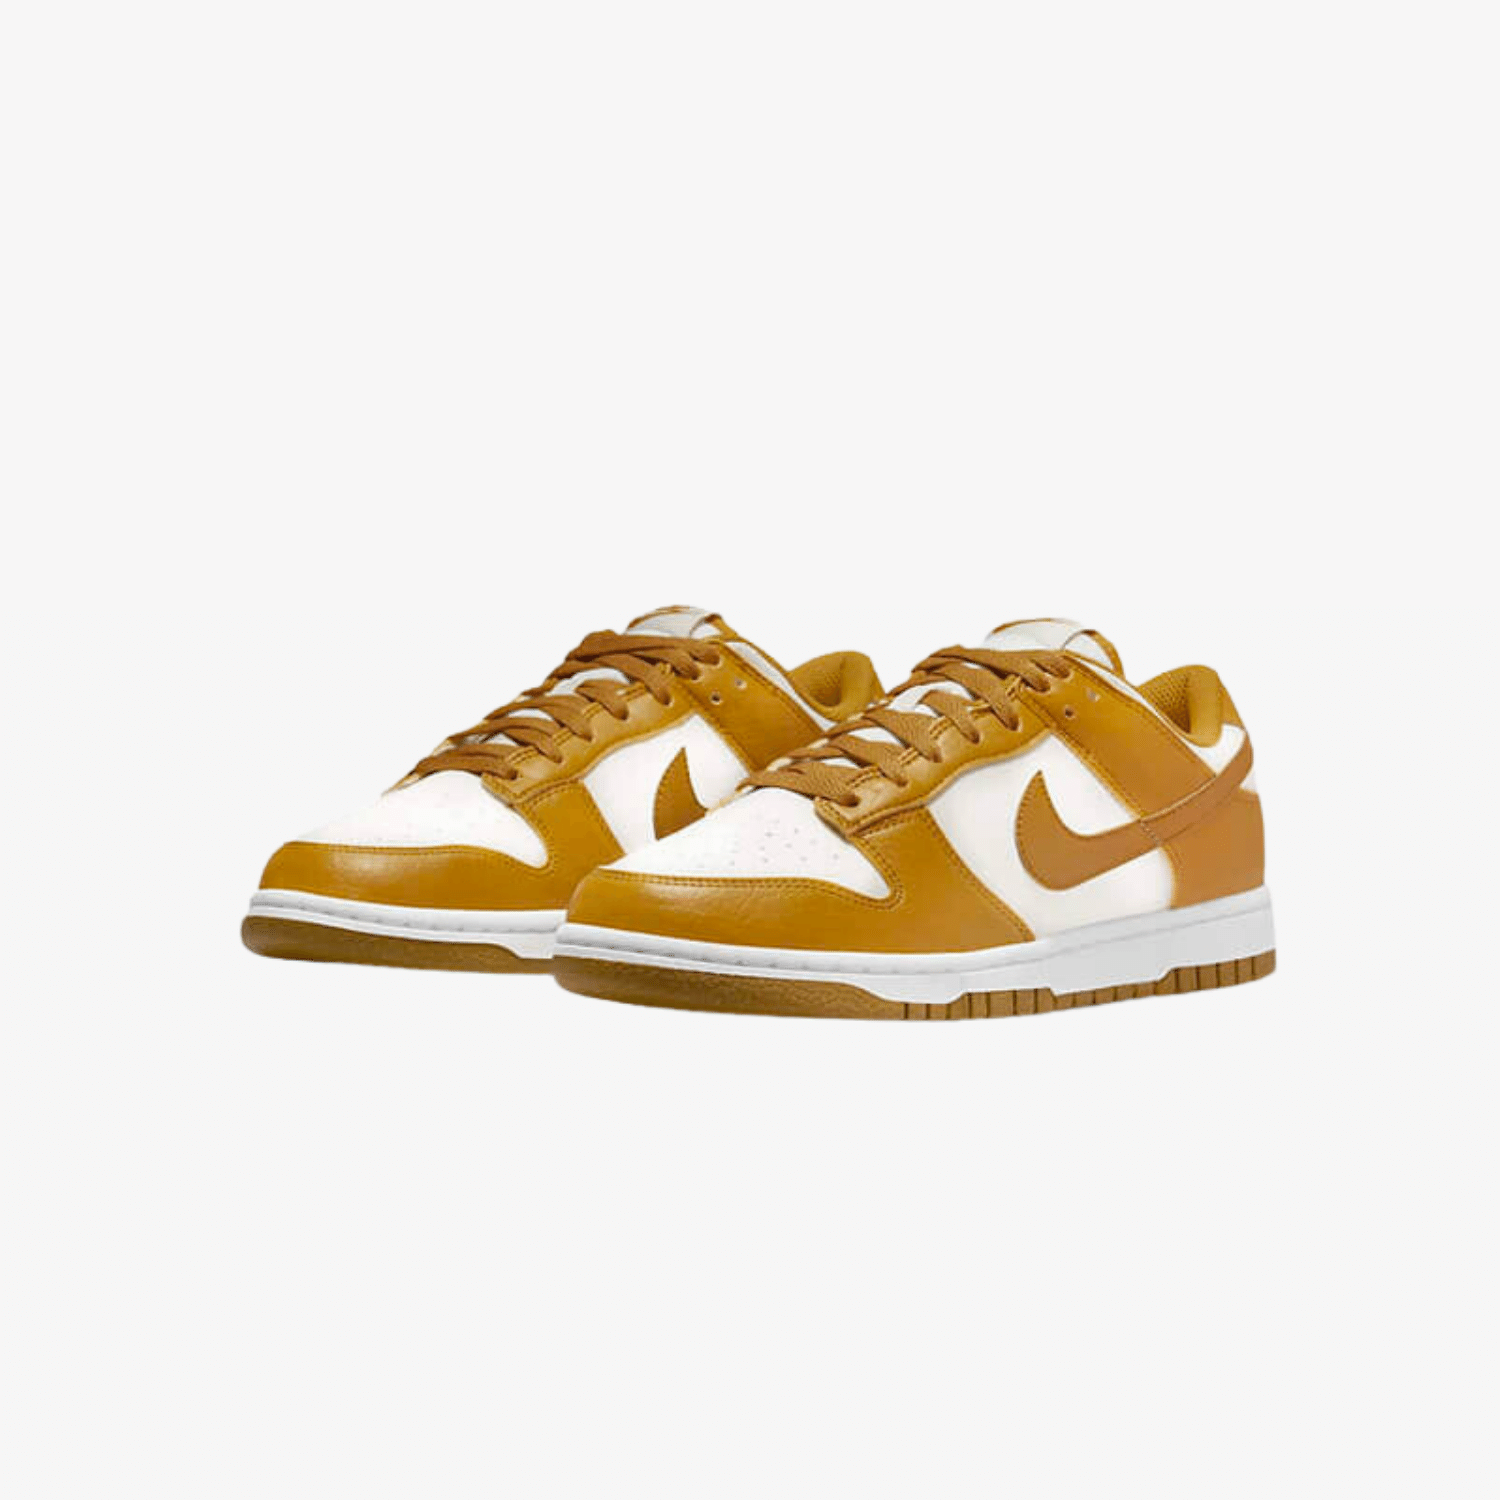    nike-dunk-low-gold-suede-DN1431-001-unfazed-2